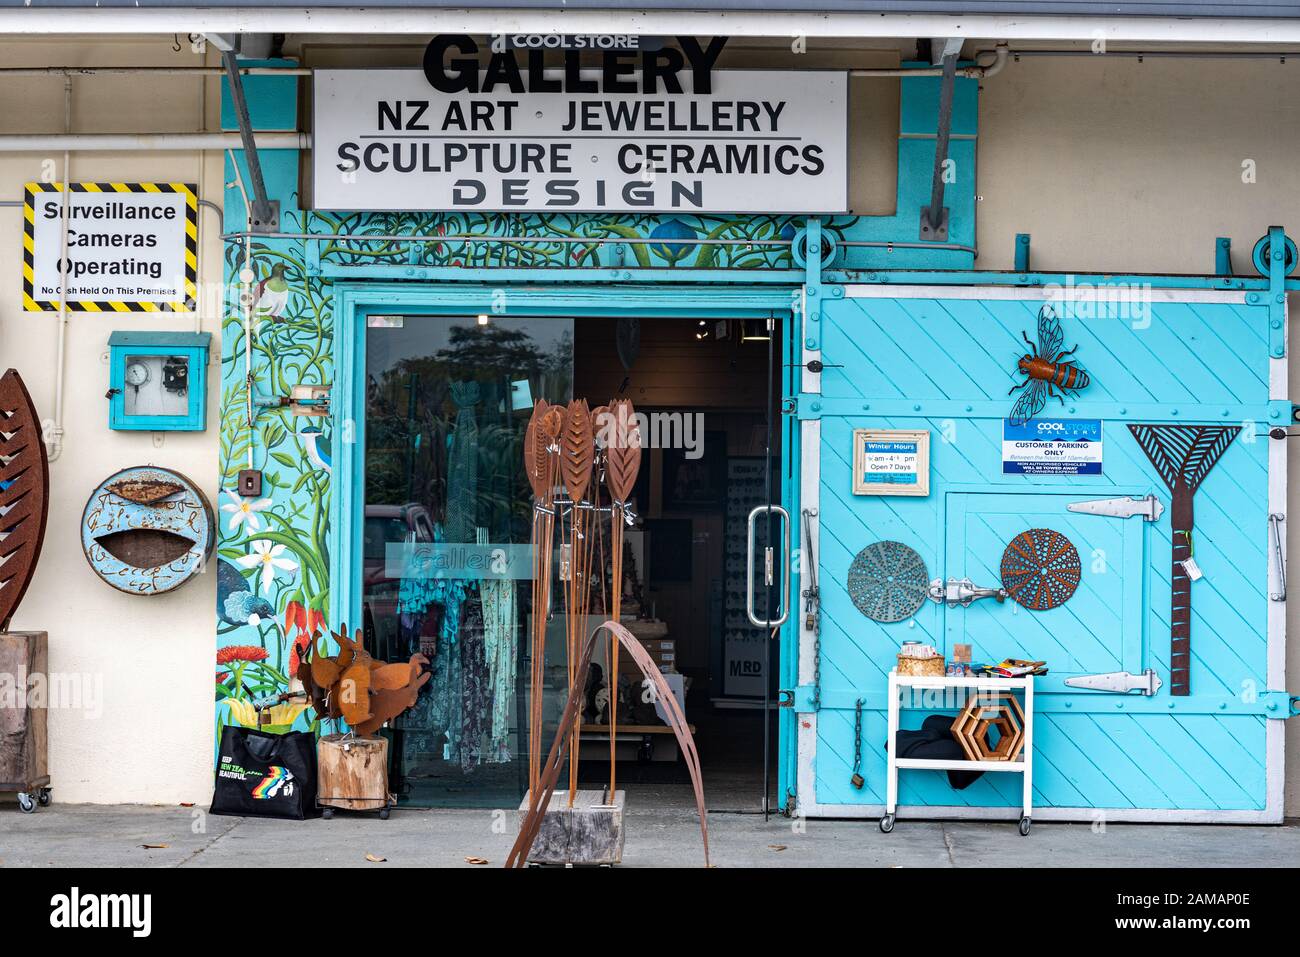 Art objects gallery in an old coldstore, Mapua, New Zealand Stock Photo